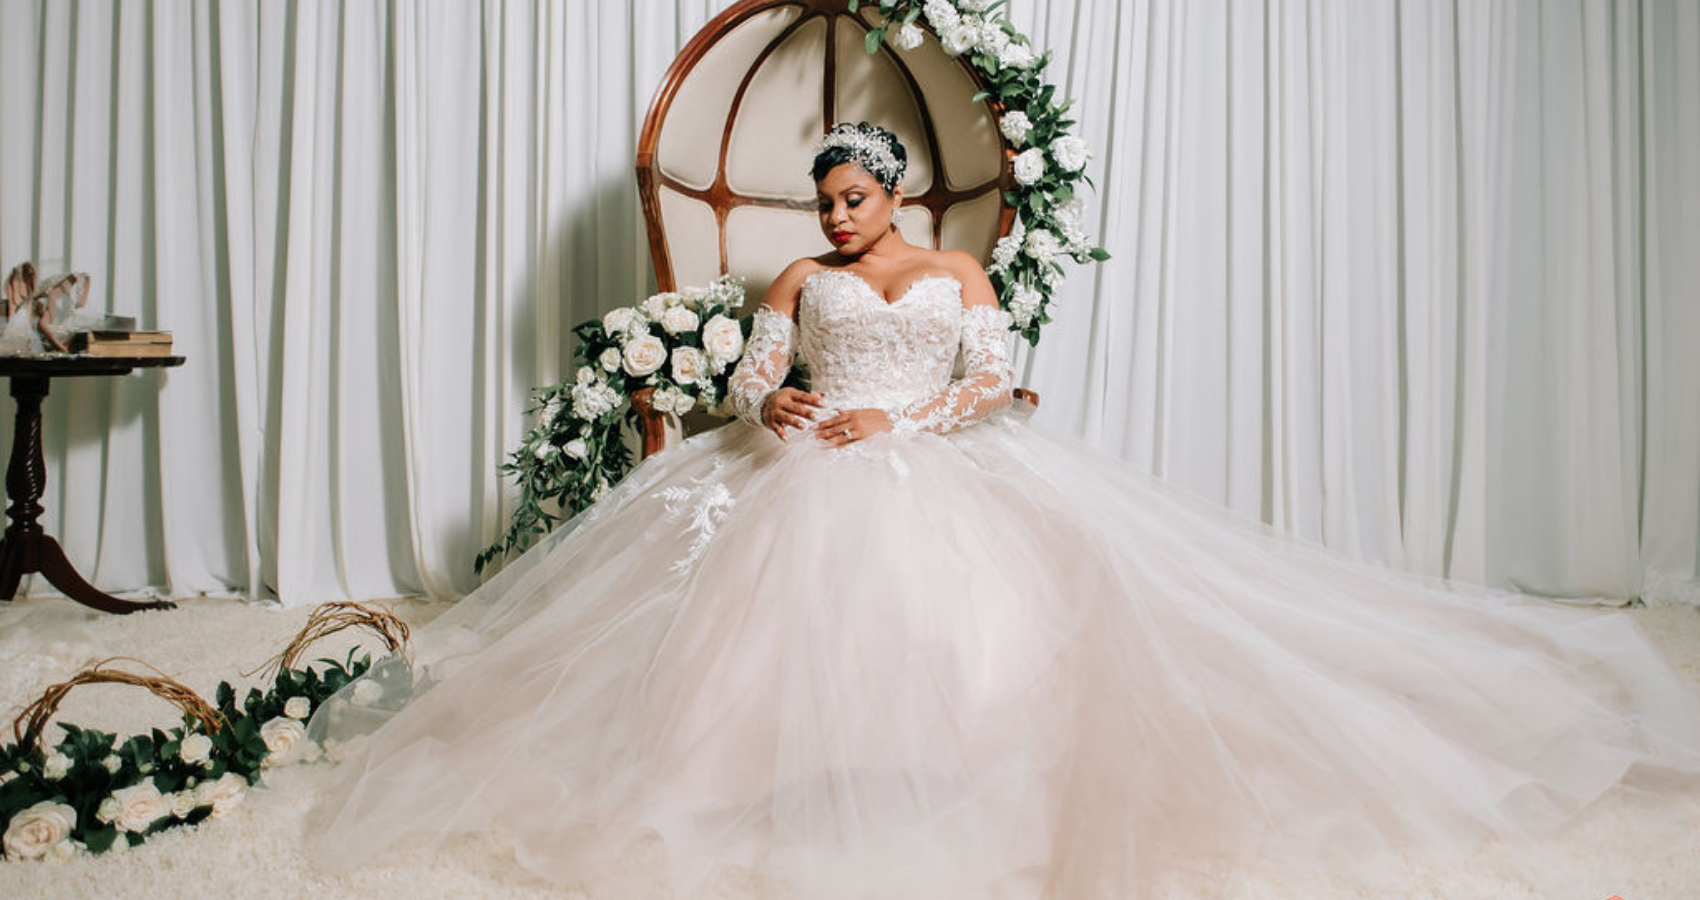 The Tiana Wedding Gowns | The Bridal Collection in Denver